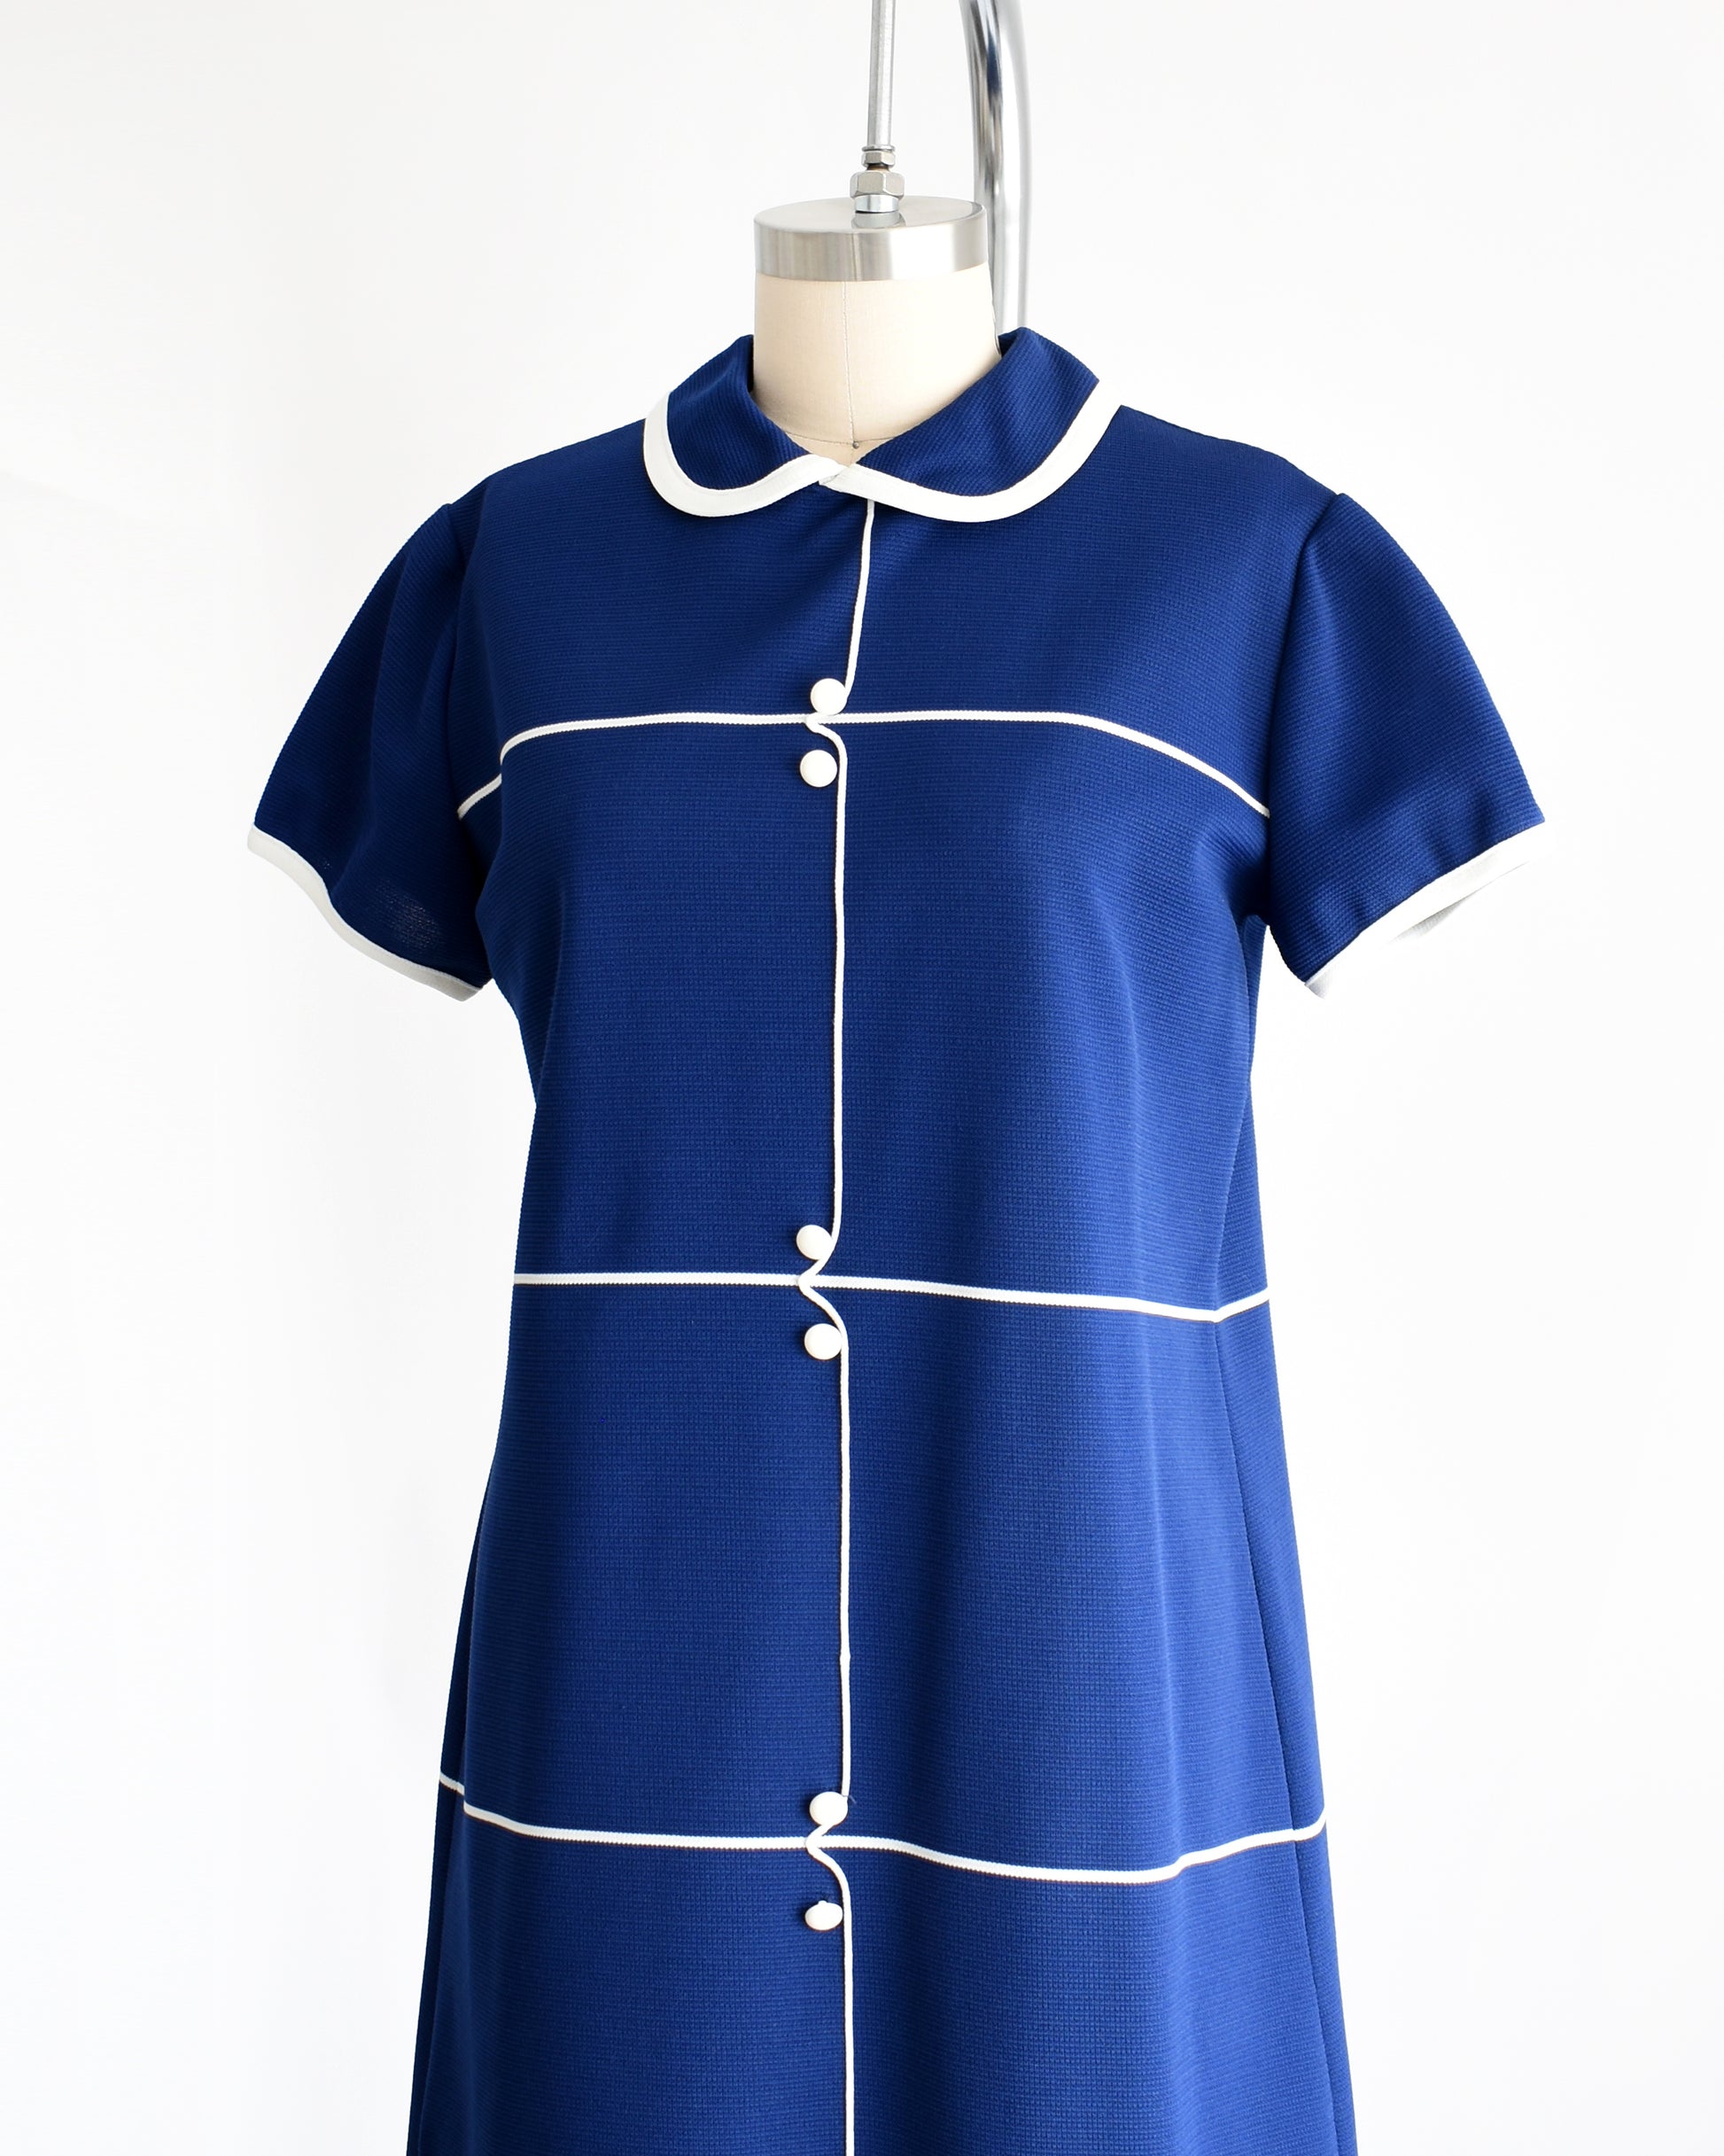 Side front view of a vintage 1960s navy blue dress with horizontal white stripes, along with a stripe down the front with decorative button accents.